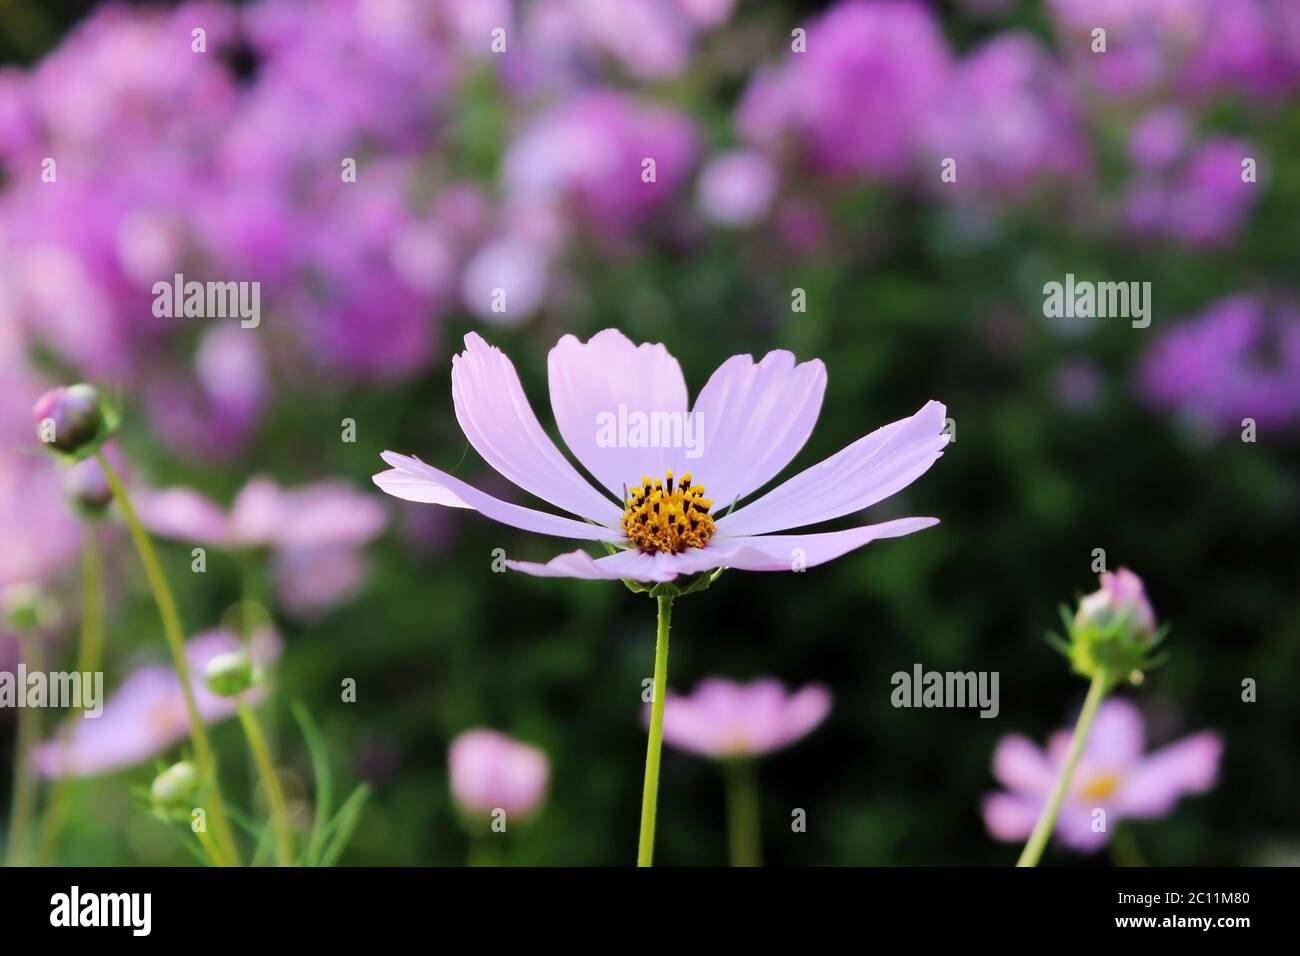 pink purple flower, like a daisy in the light of the setting sun. Stock Photo